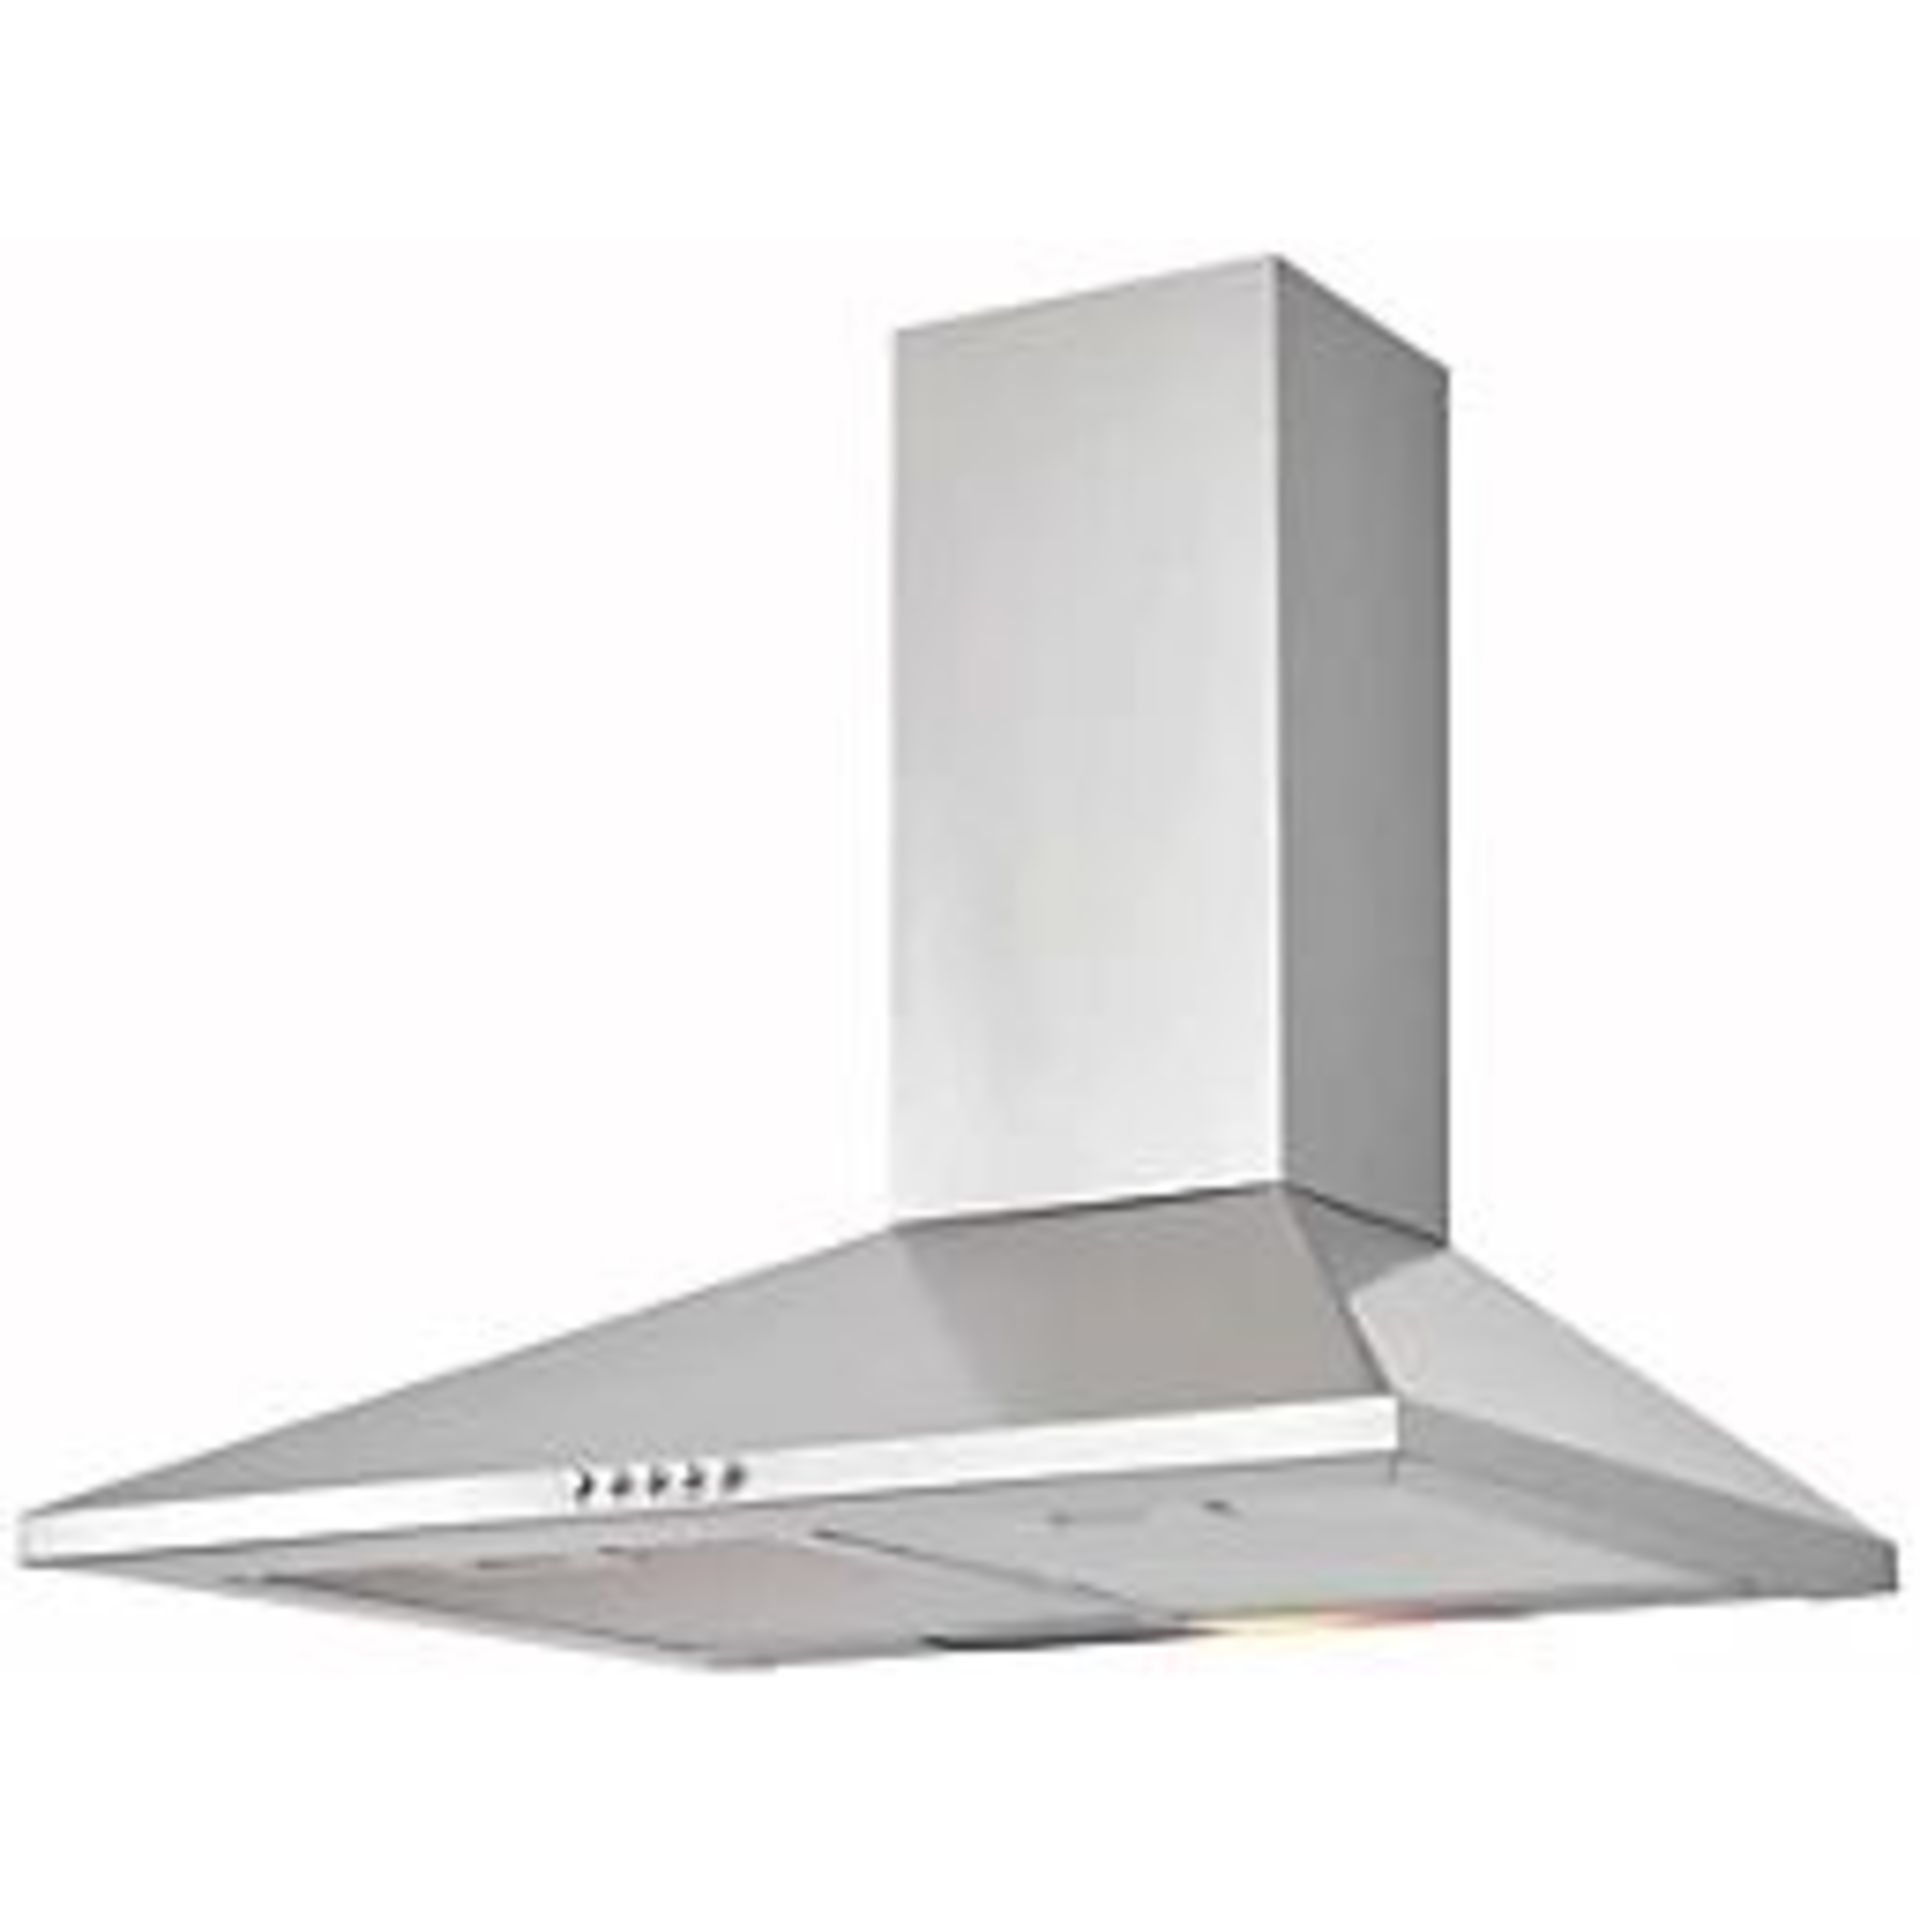 COOKE & LEWIS CHIMNEY HOOD STAINLESS STEEL 600MM. - R9BW. Helps to remove cooking odours and